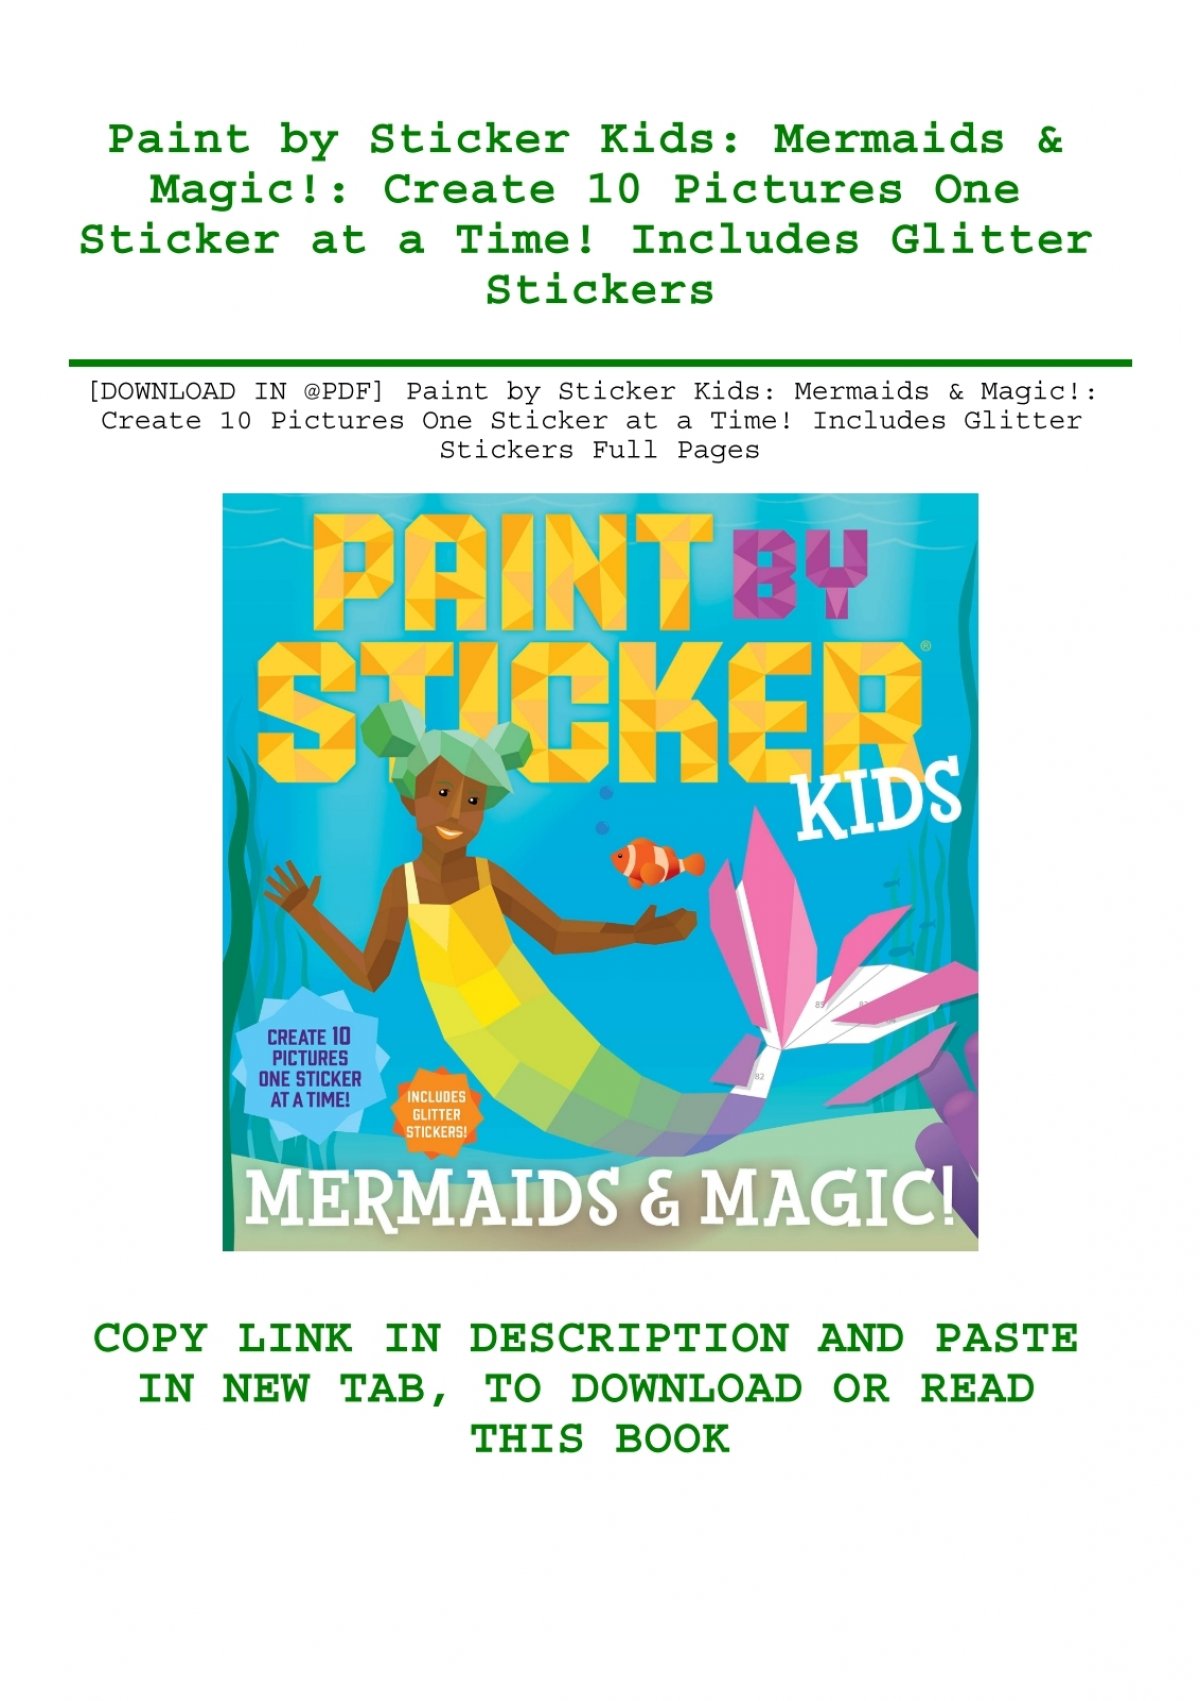 Paint by Sticker Kids: Mermaids & Magic!: Create 10 Pictures One Sticker at a Time! Includes Glitter Stickers [Book]